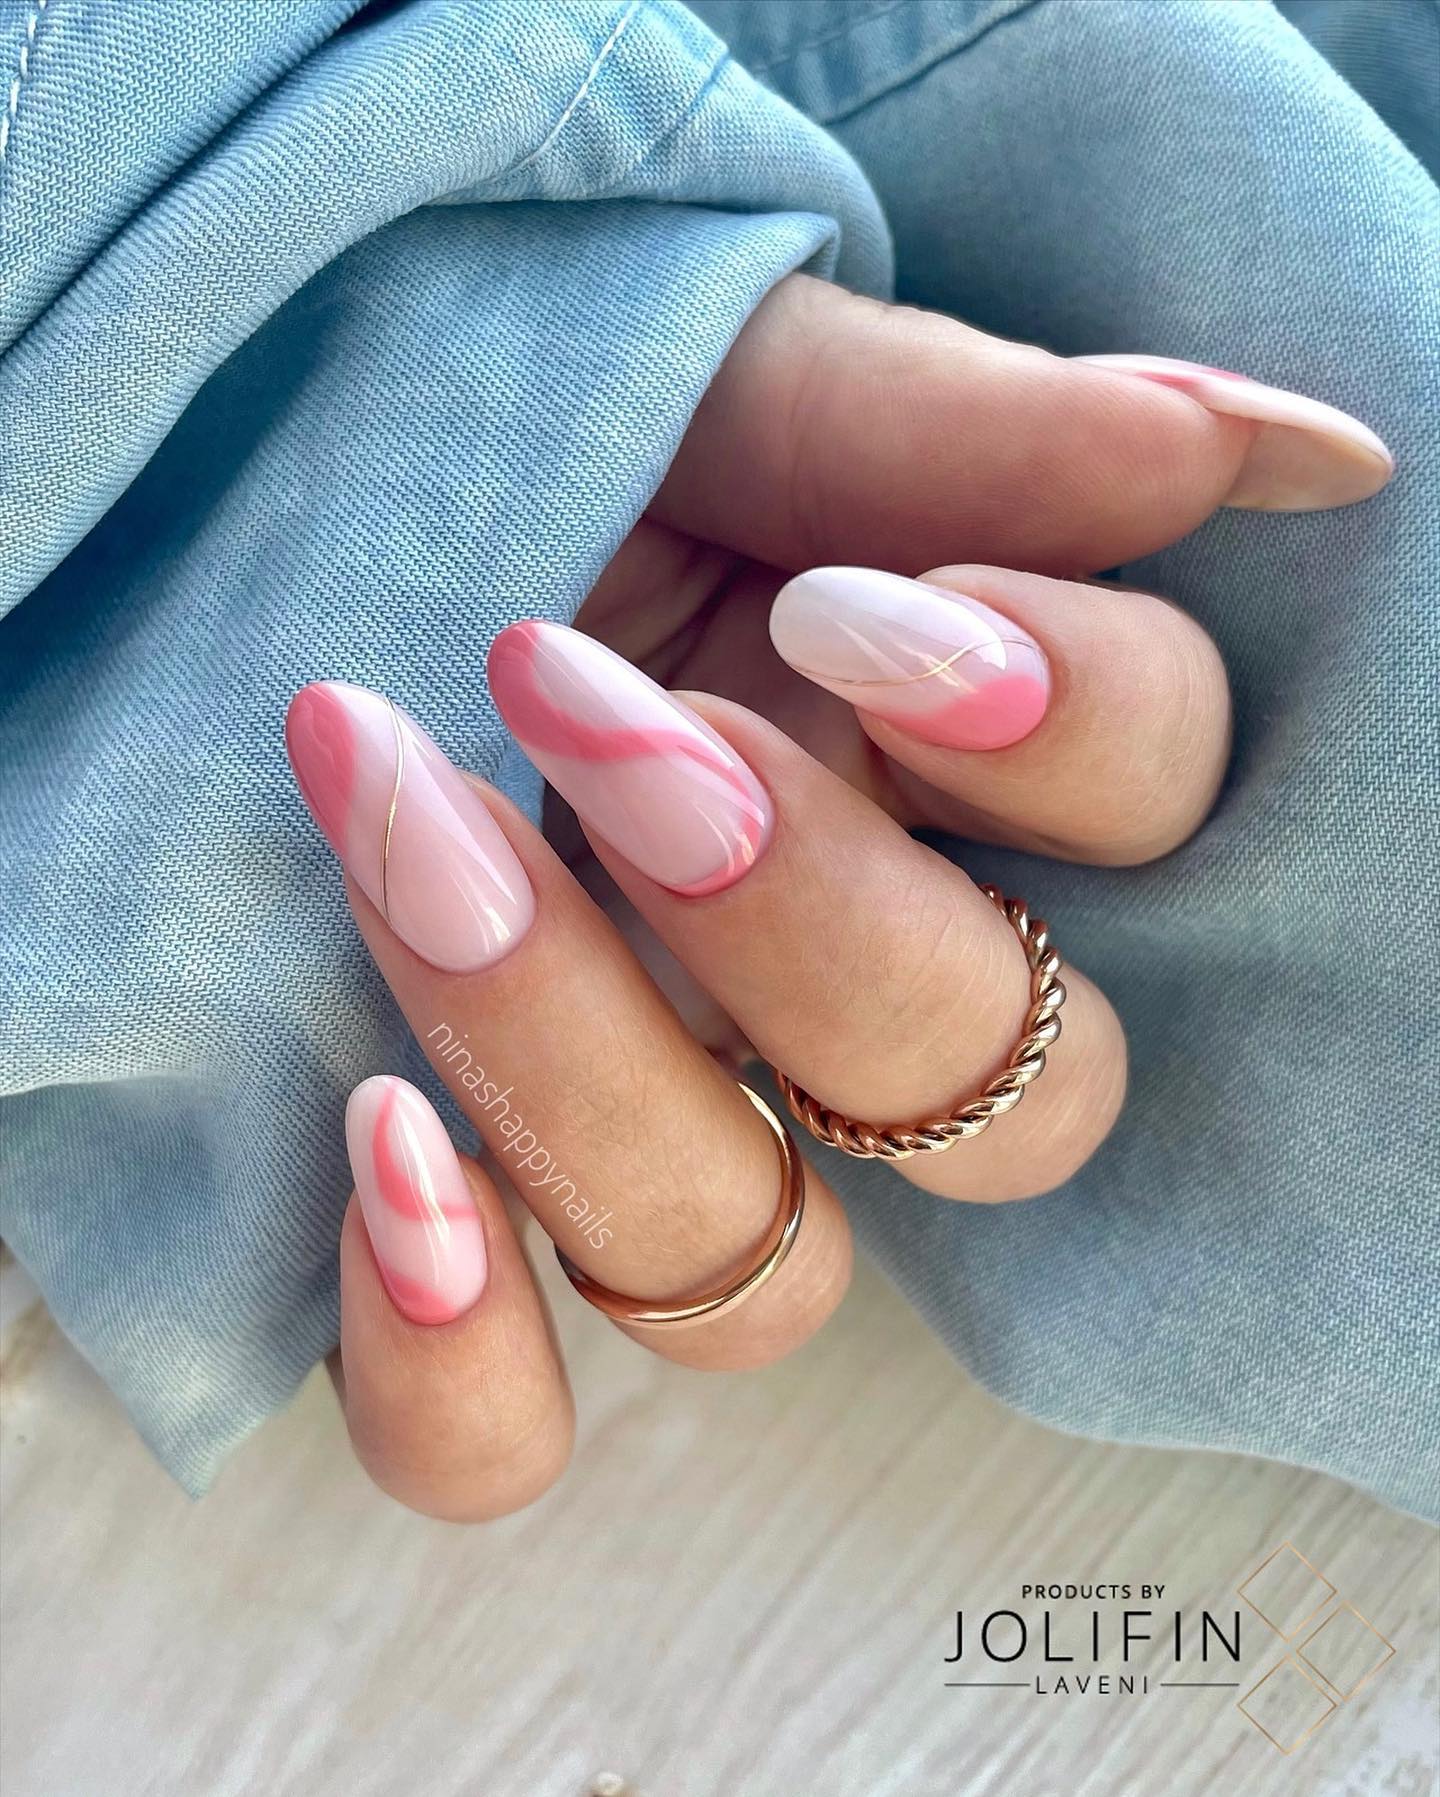 It must be an amazing feeling to have these swirl nails. Big pink swirls and some golden ones make these nails fabulous.